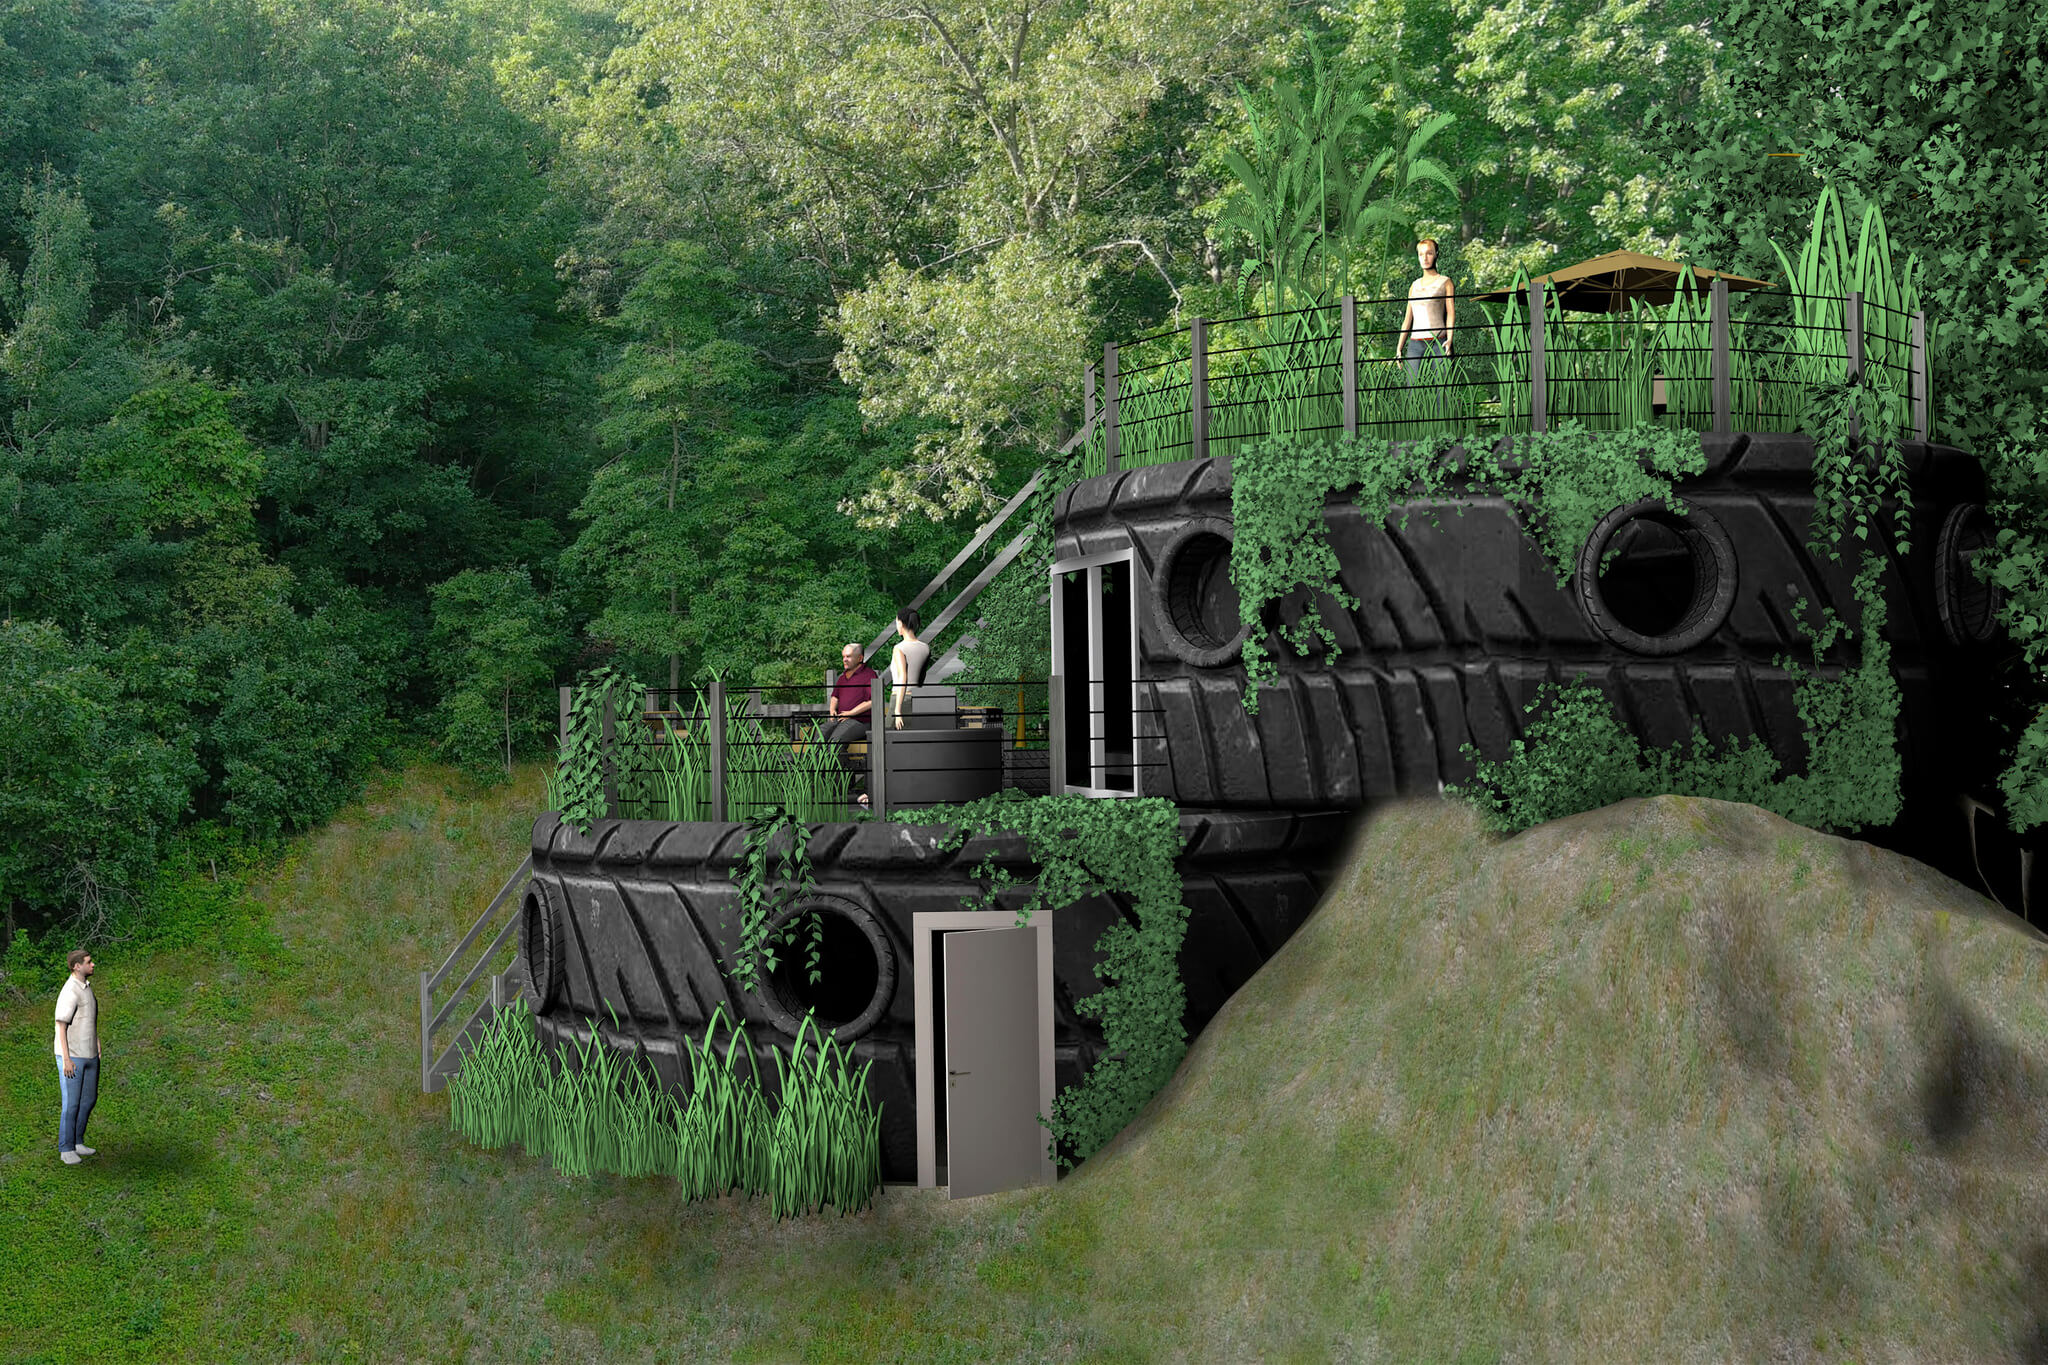 dwelling constructed out of recycled tires